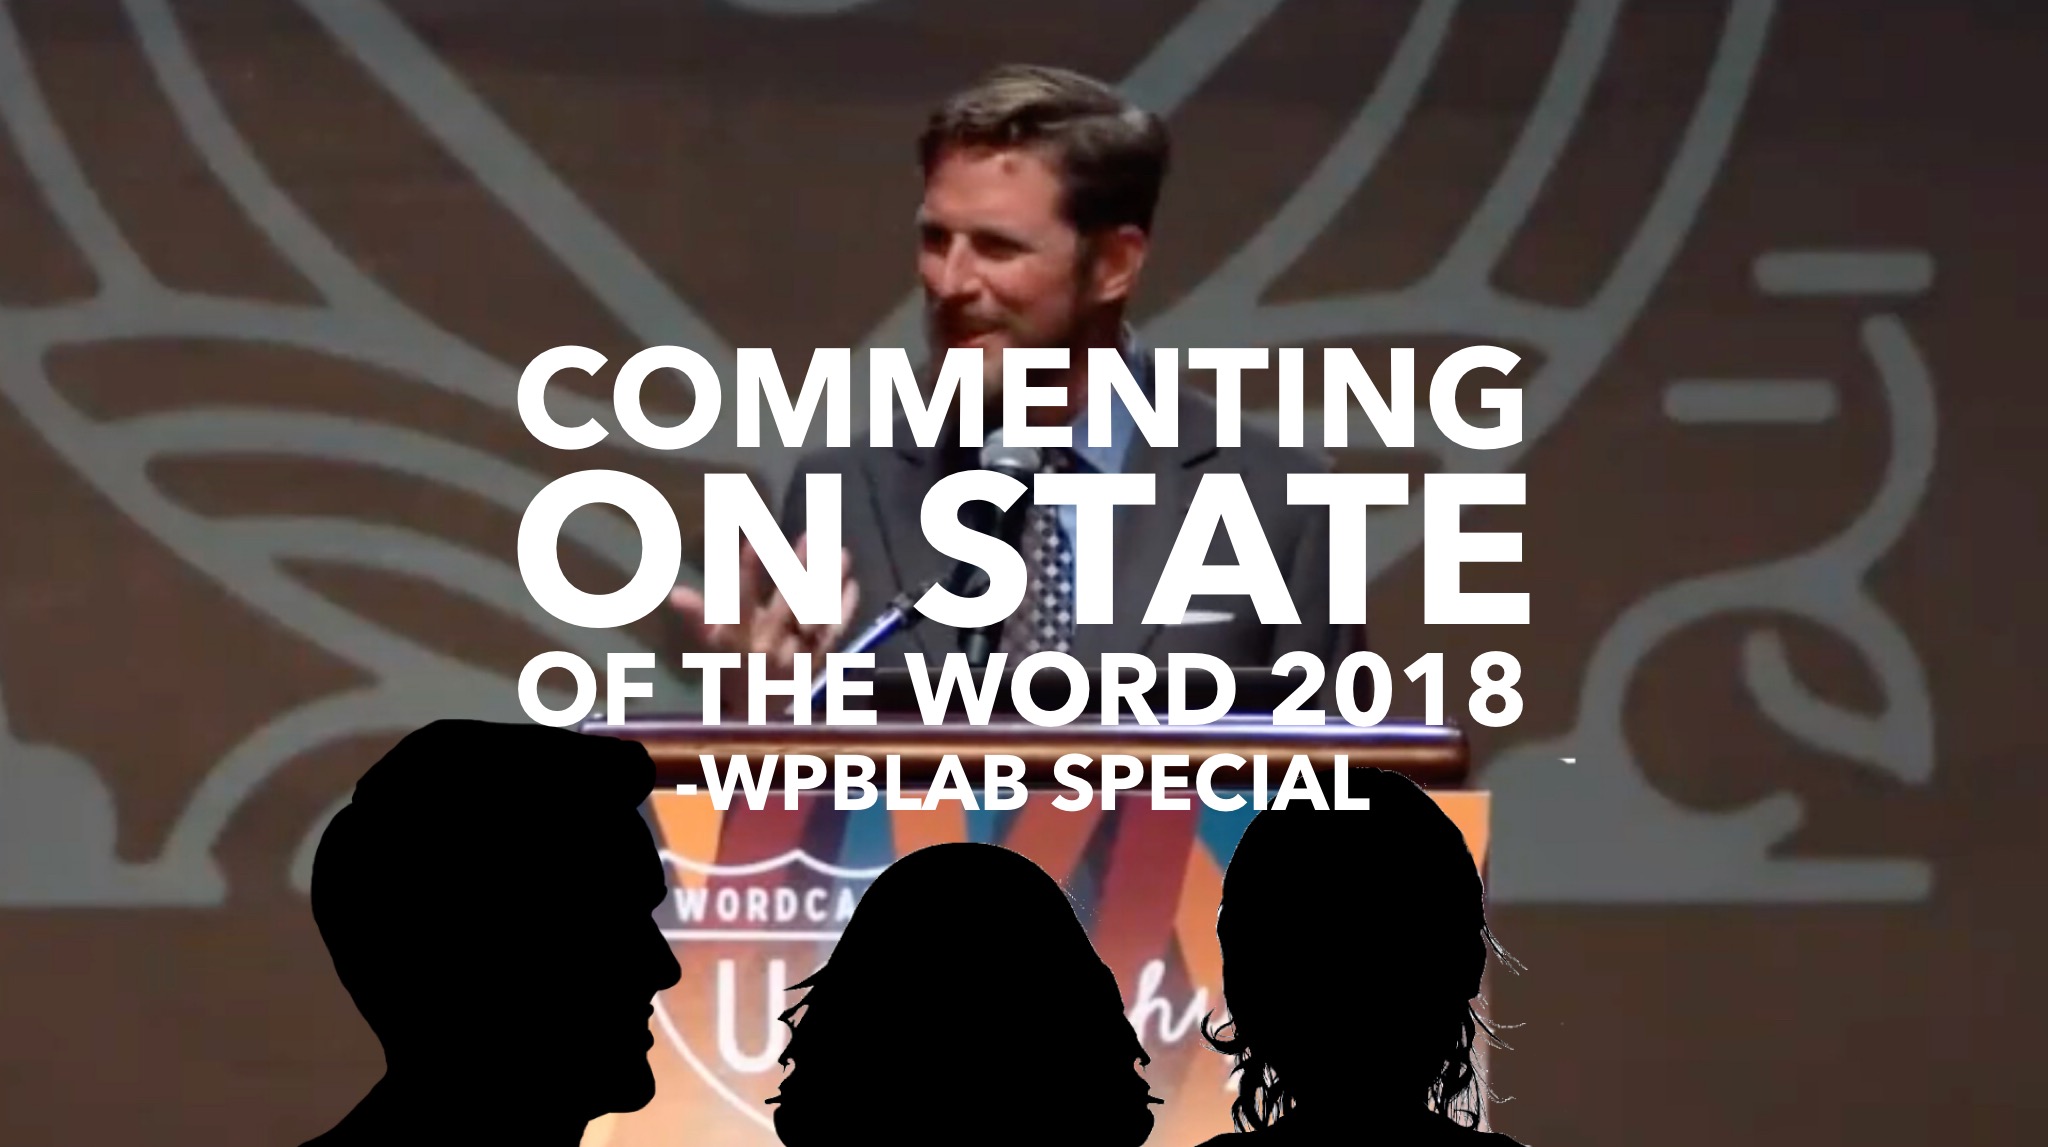 WPblab Special - Commenting on State of the Word 2018 1